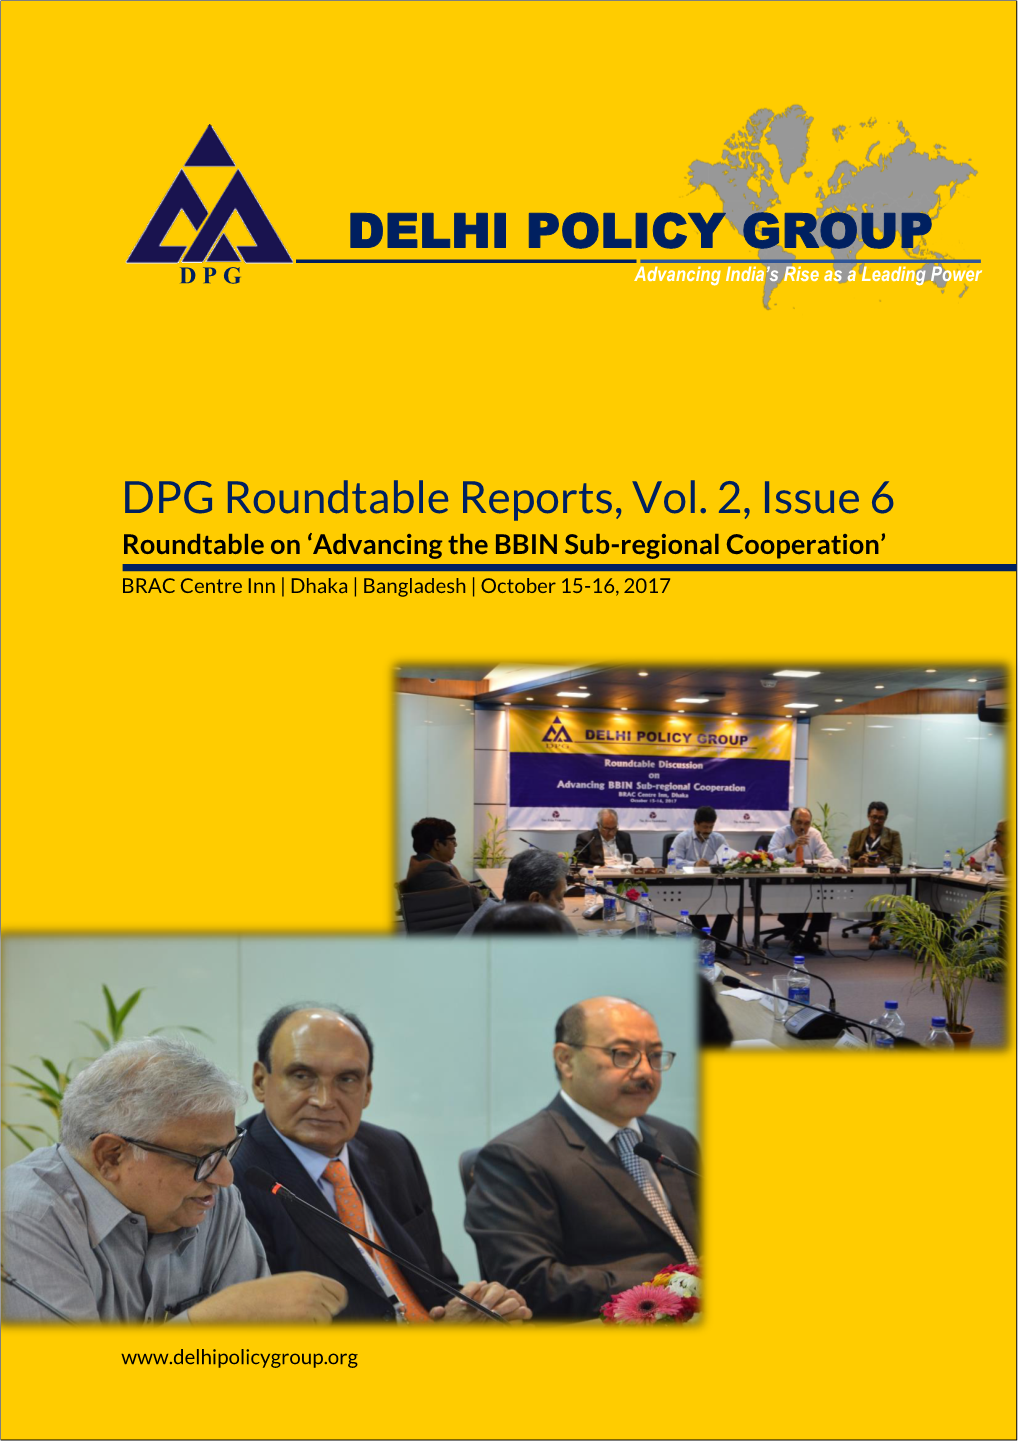 Dpg-Roundtable-Reports-Vol-2-Issue-6